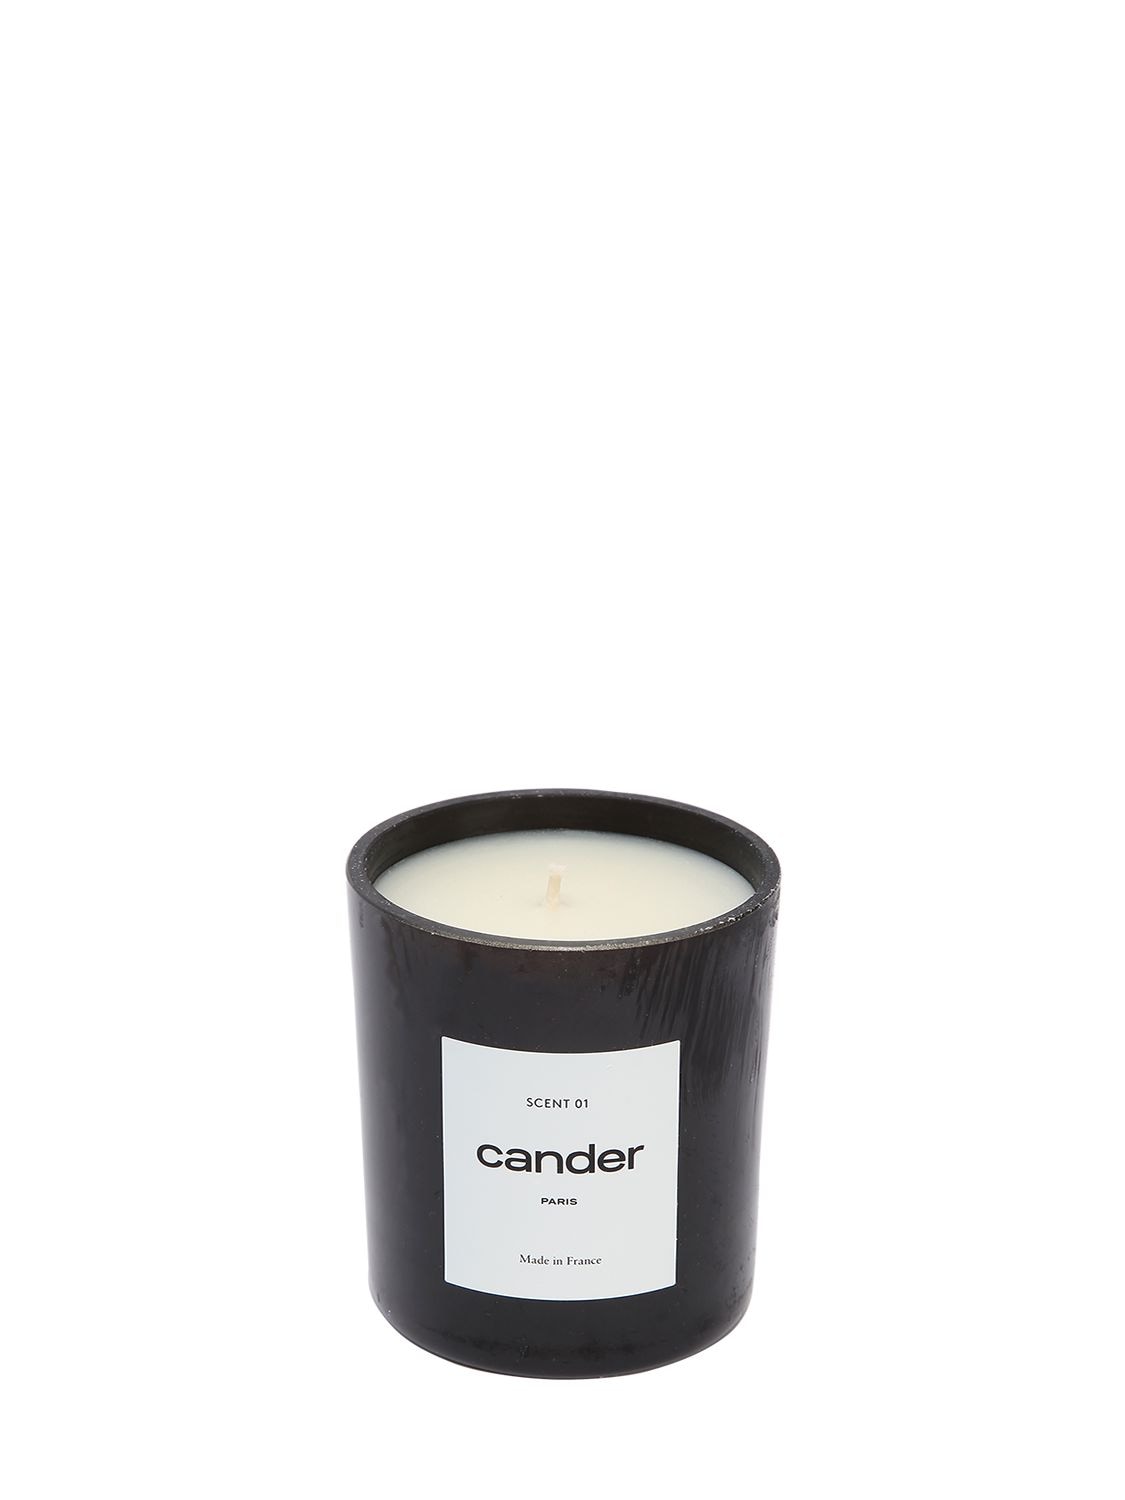 Cander Paris Scent 01 Candle In Black